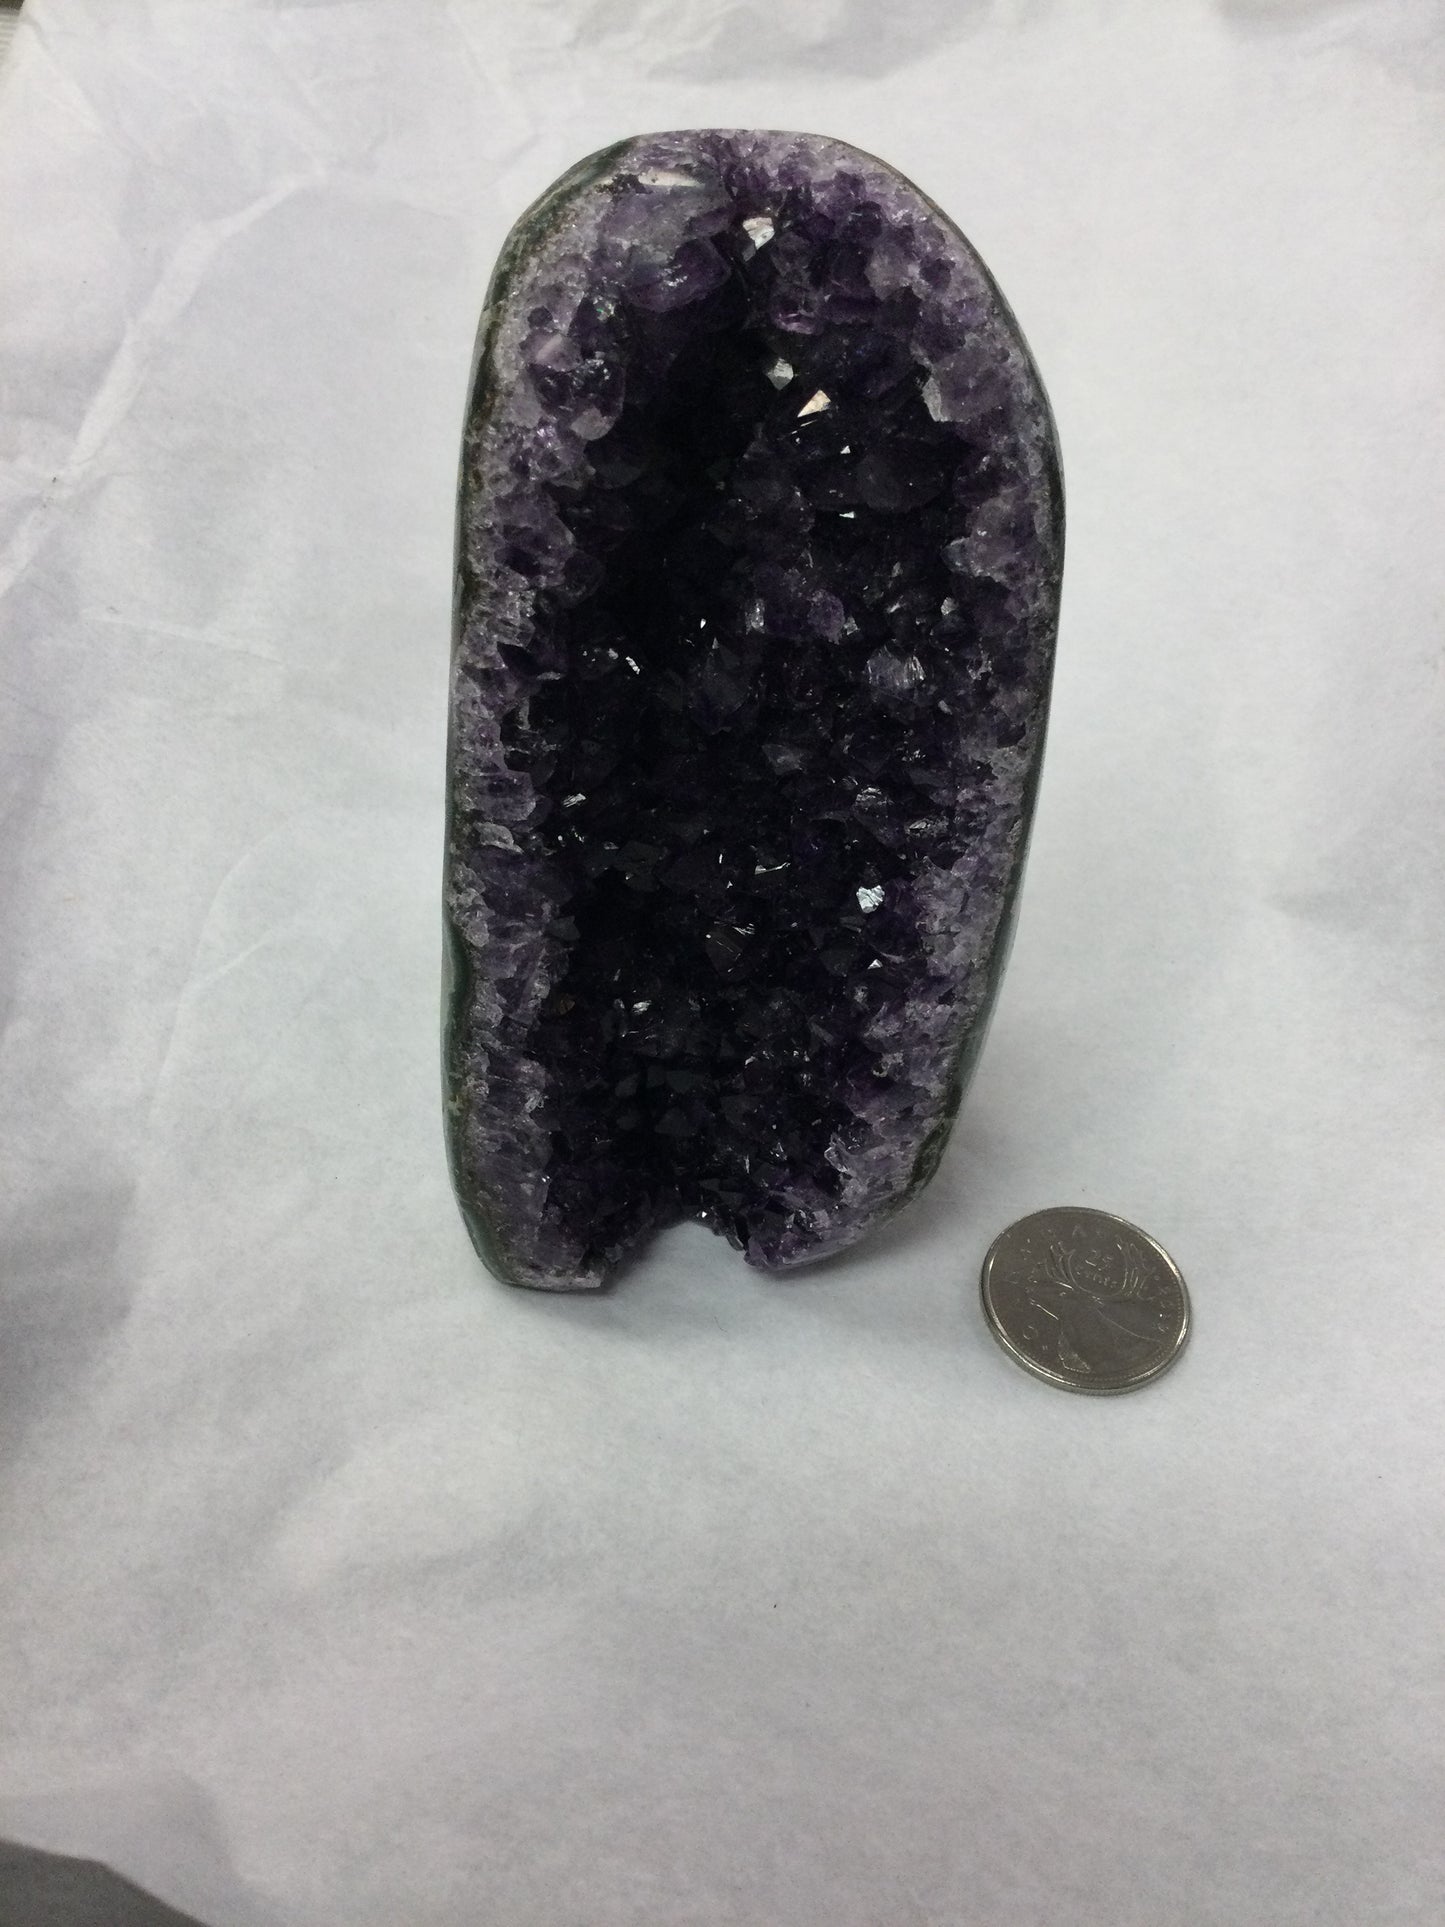 Amethyst Geode, upright with slight bend